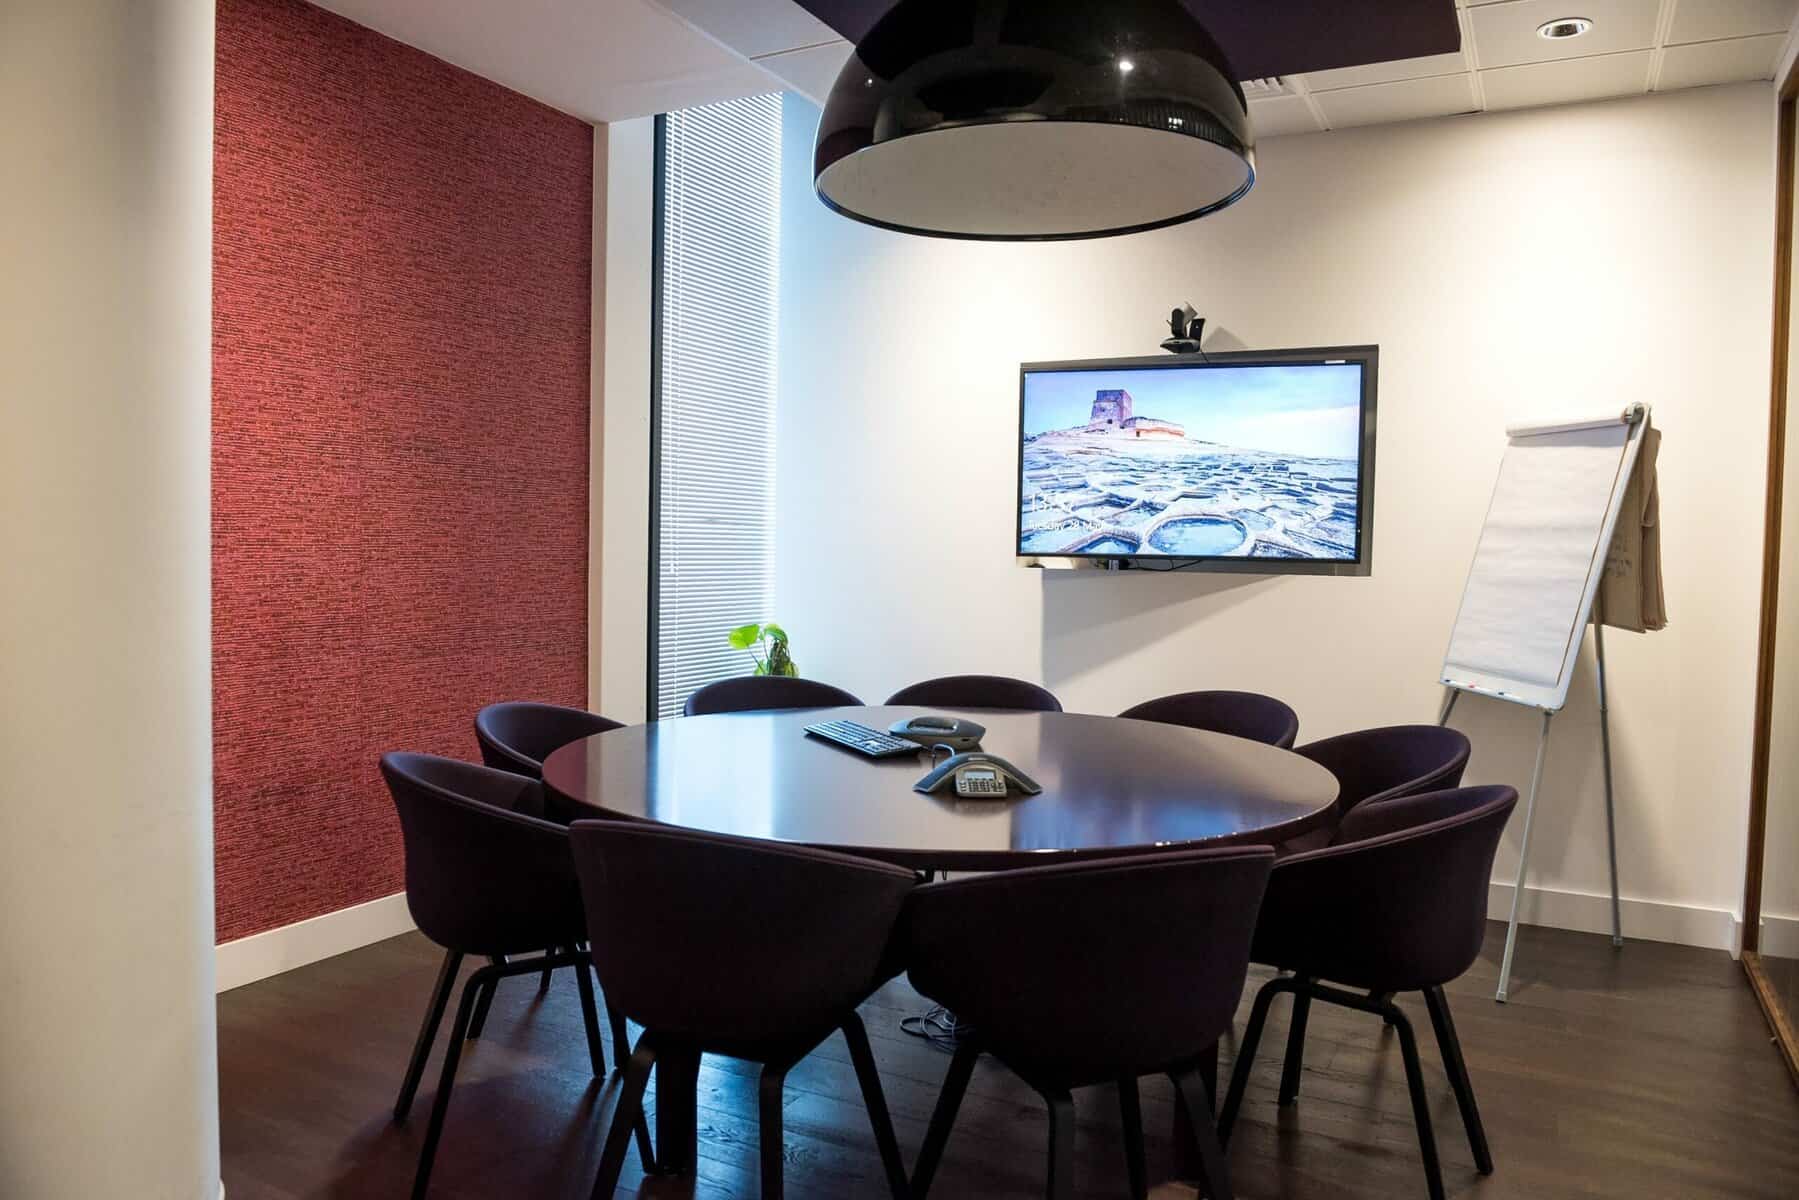 An AV system installed in a small conference room